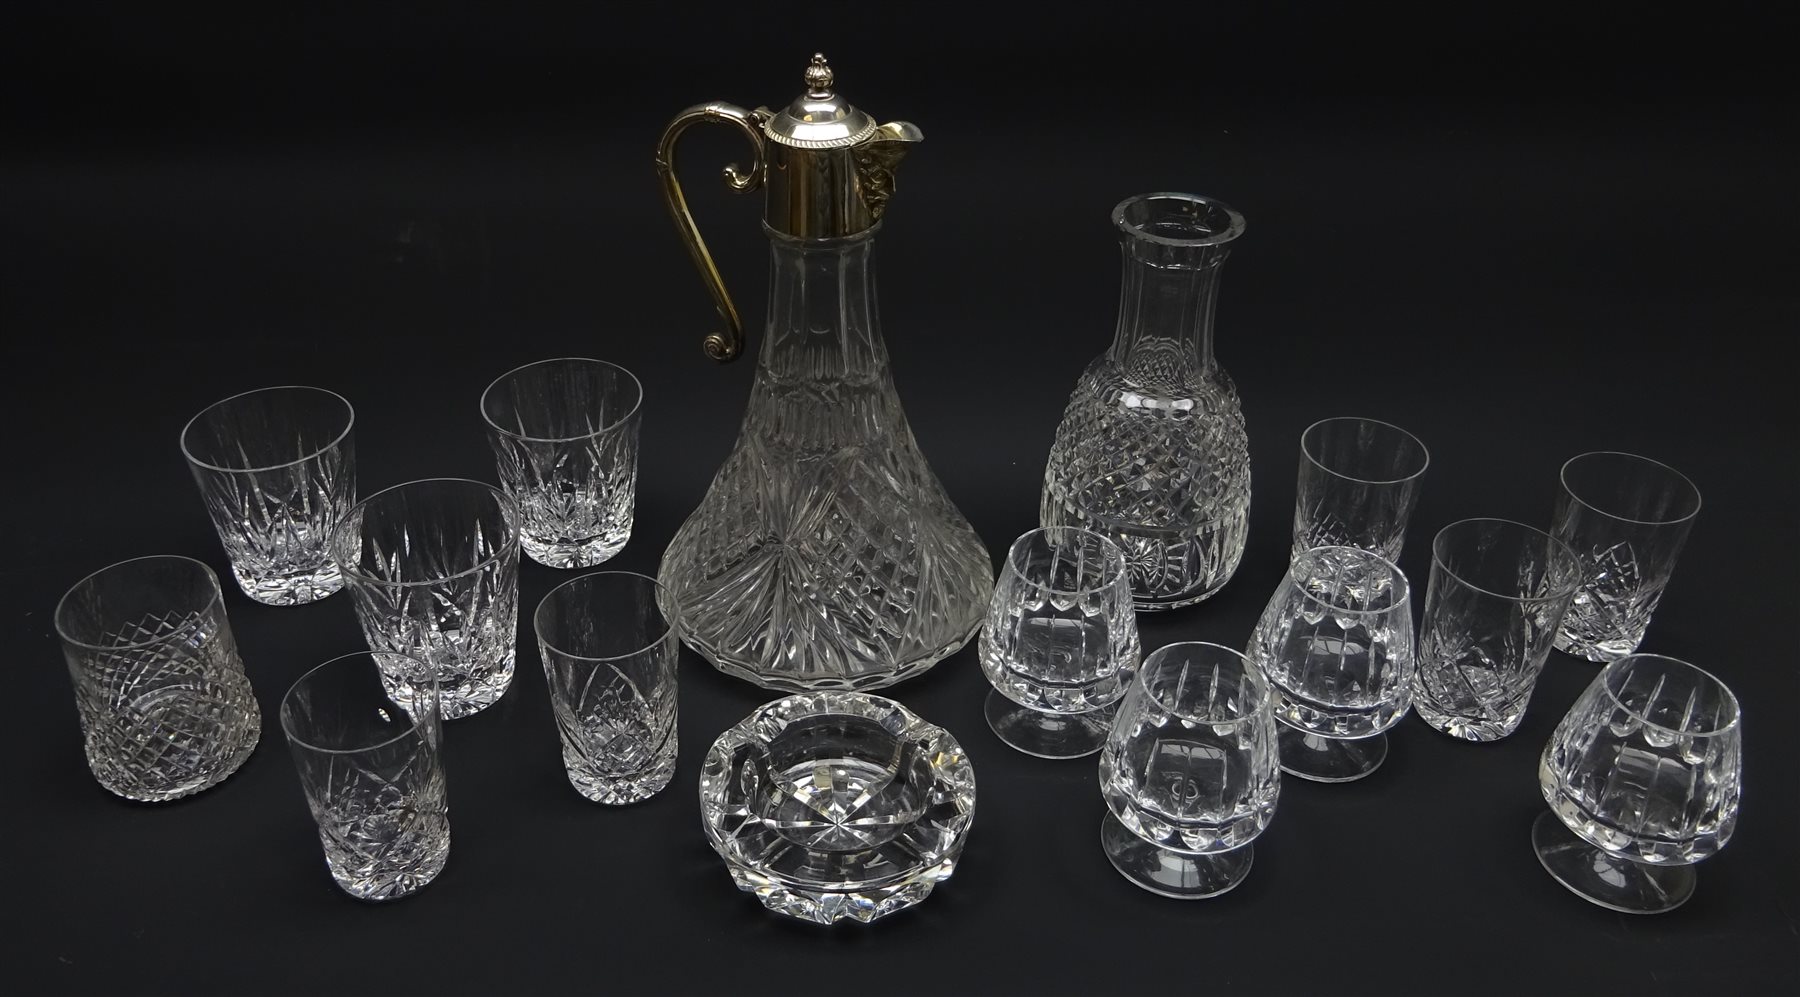 Waterford Crystal “Alana” Pattern Tumblers